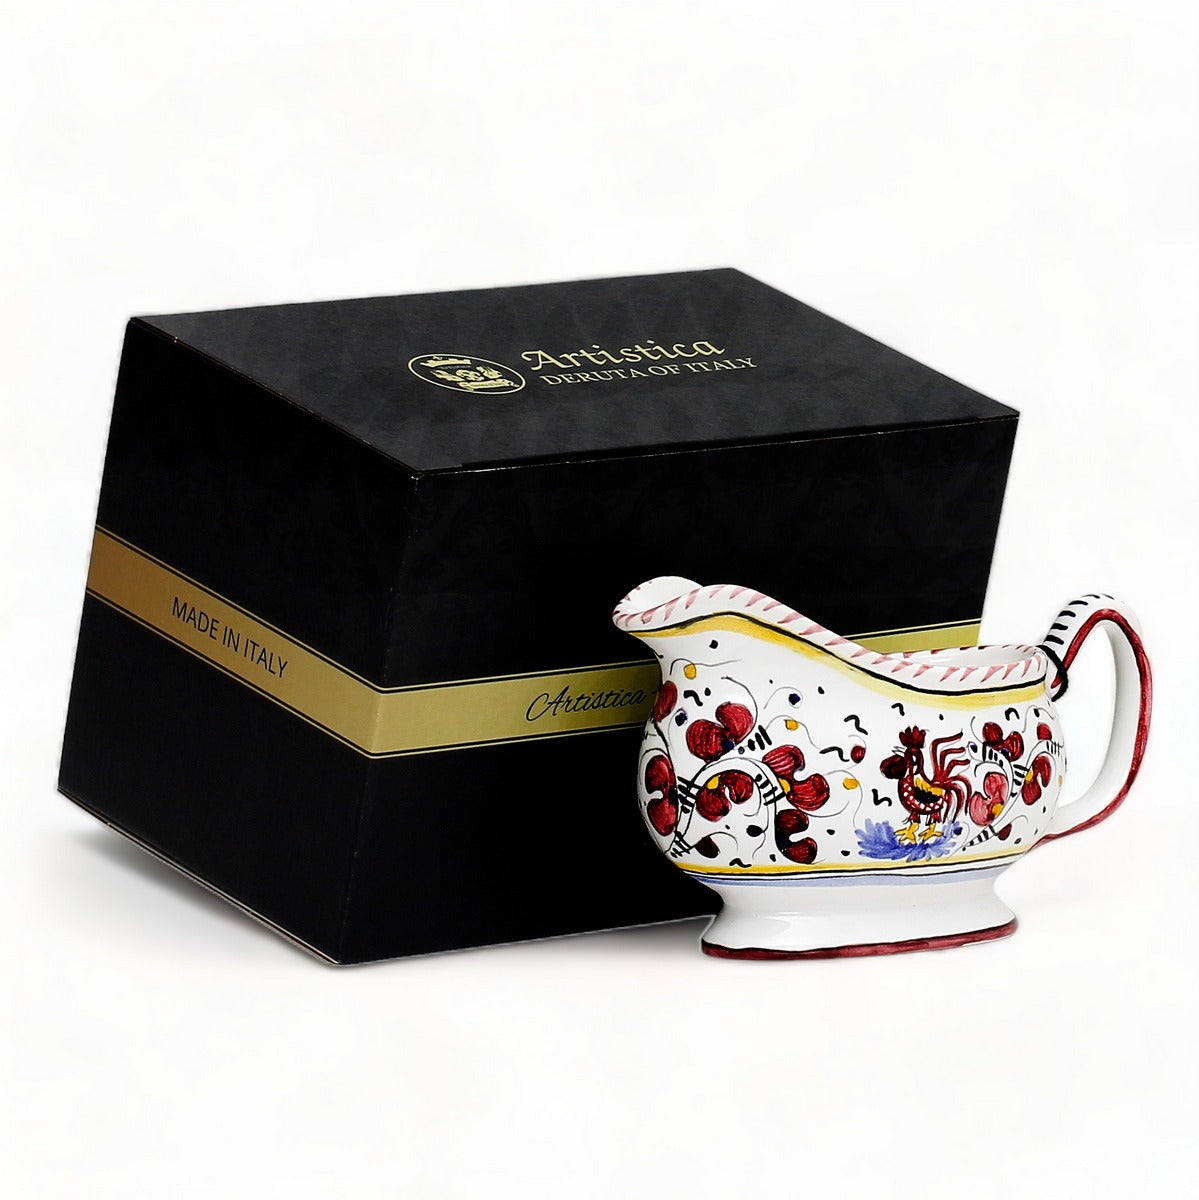 GIFT BOX: With authentic Deruta hand painted ceramic - Gravy Sauce Boat Red Rooster Design